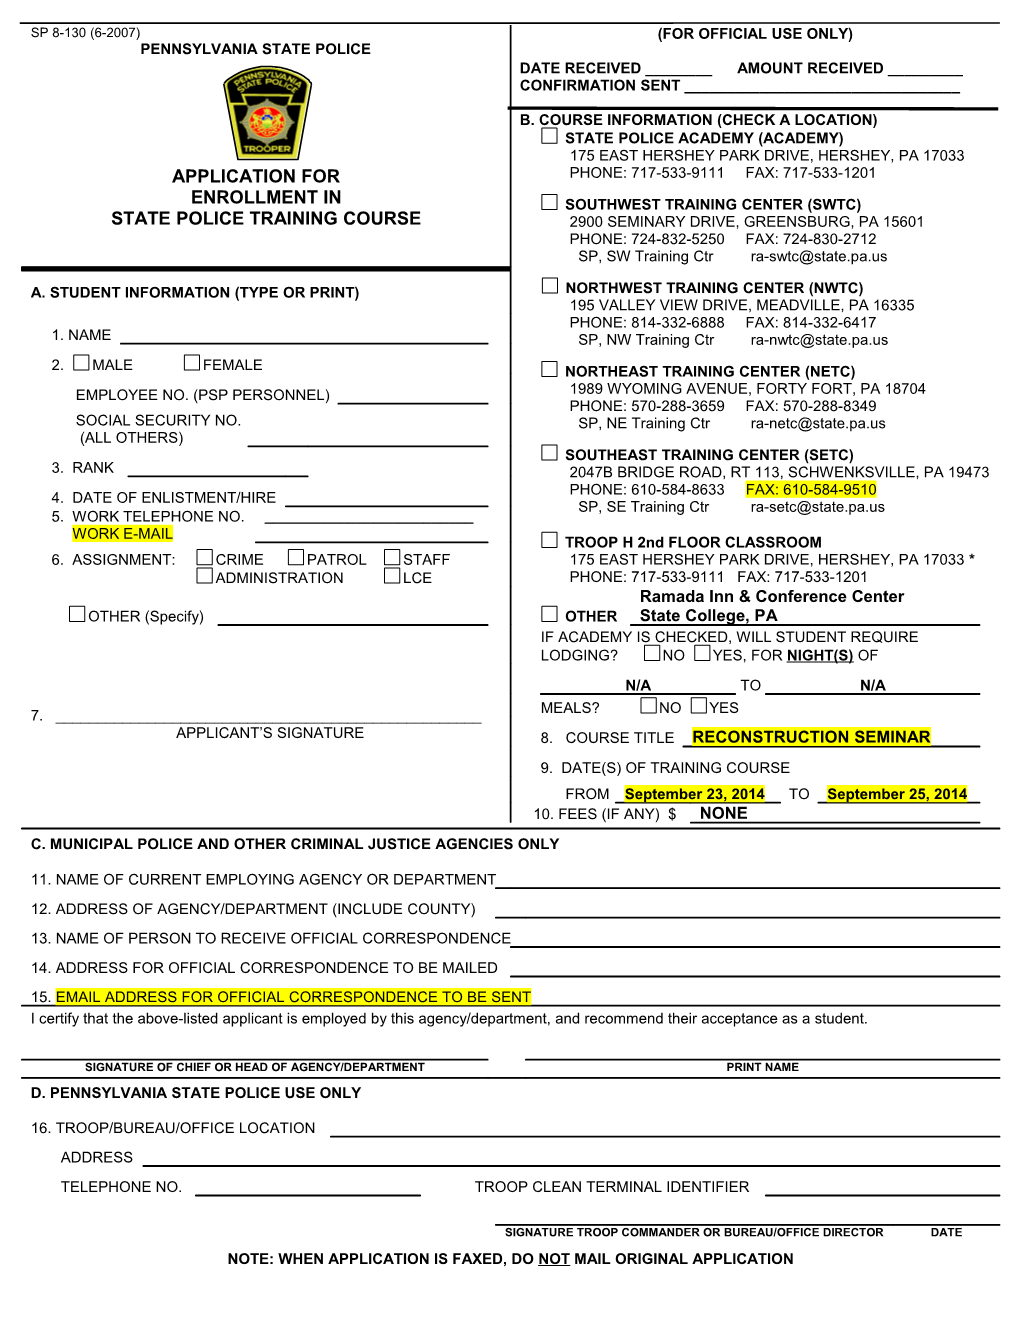 Application for Enrollment in State Police Training Course, Form Sp 8-130